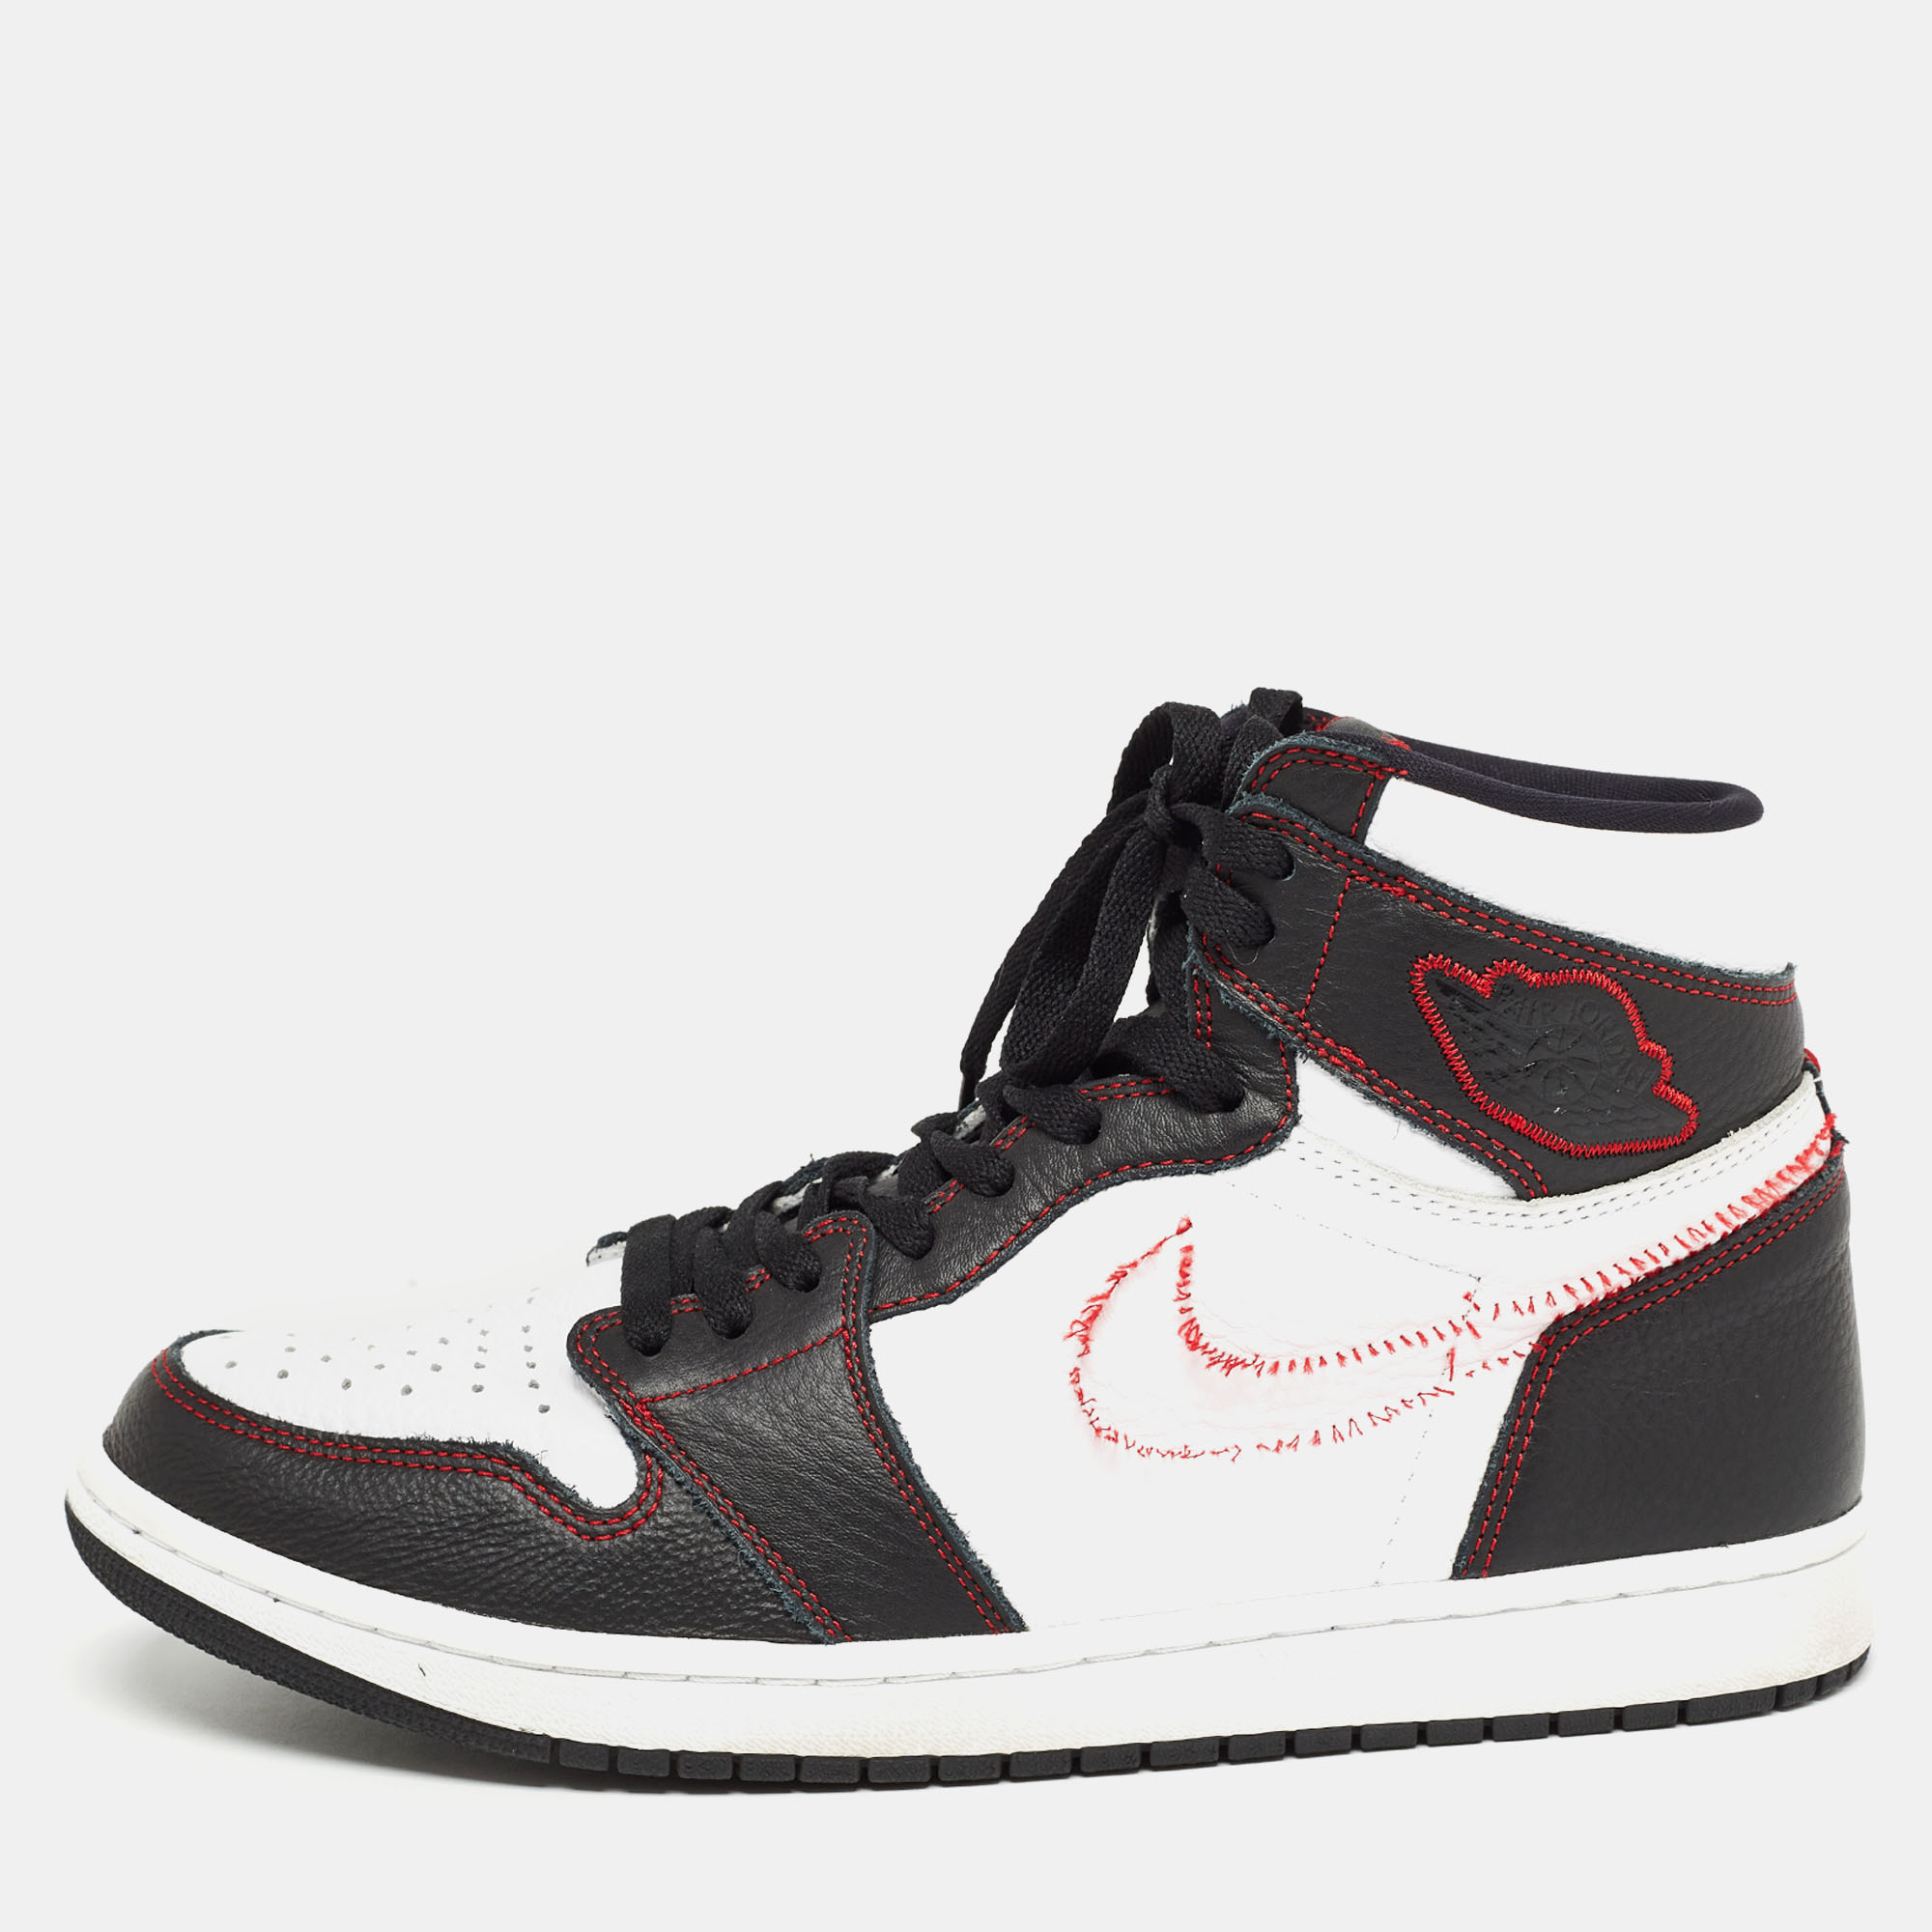 Elevate your footwear game with these Air Jordan sneakers. Combining well loved elements and unmatched comfort these sneakers will look great on your feet.